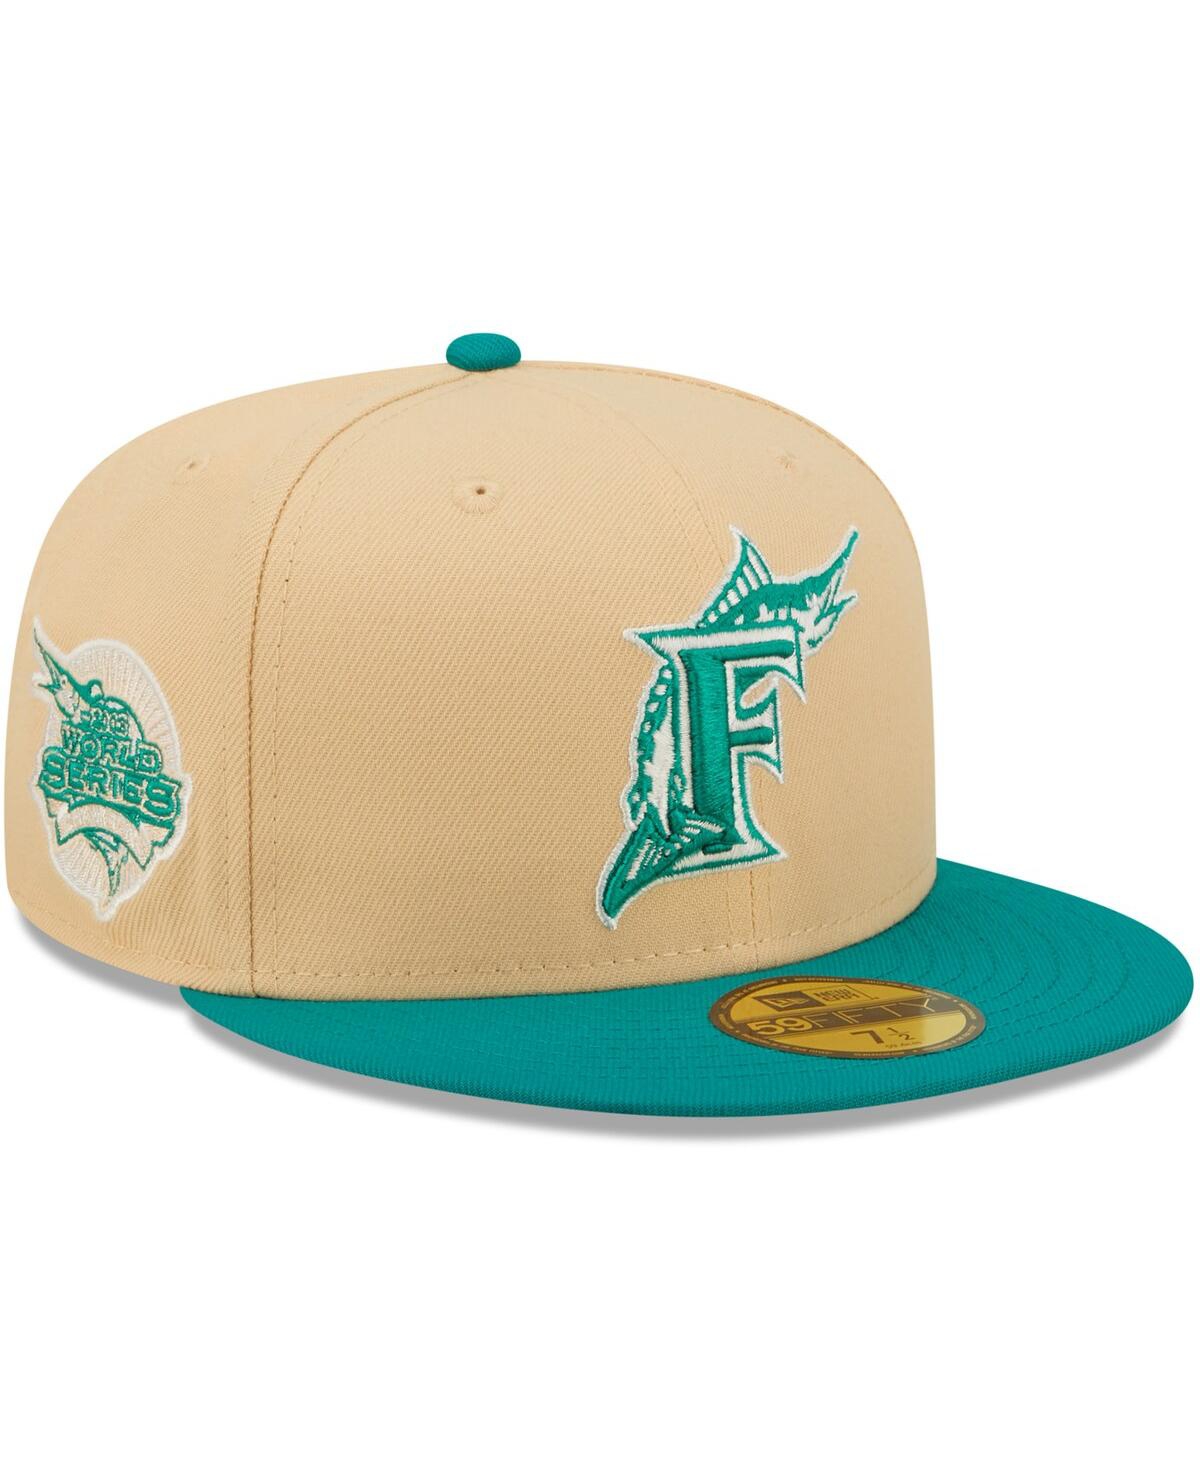 Nike Men's White, Teal Florida Marlins Cooperstown Collection